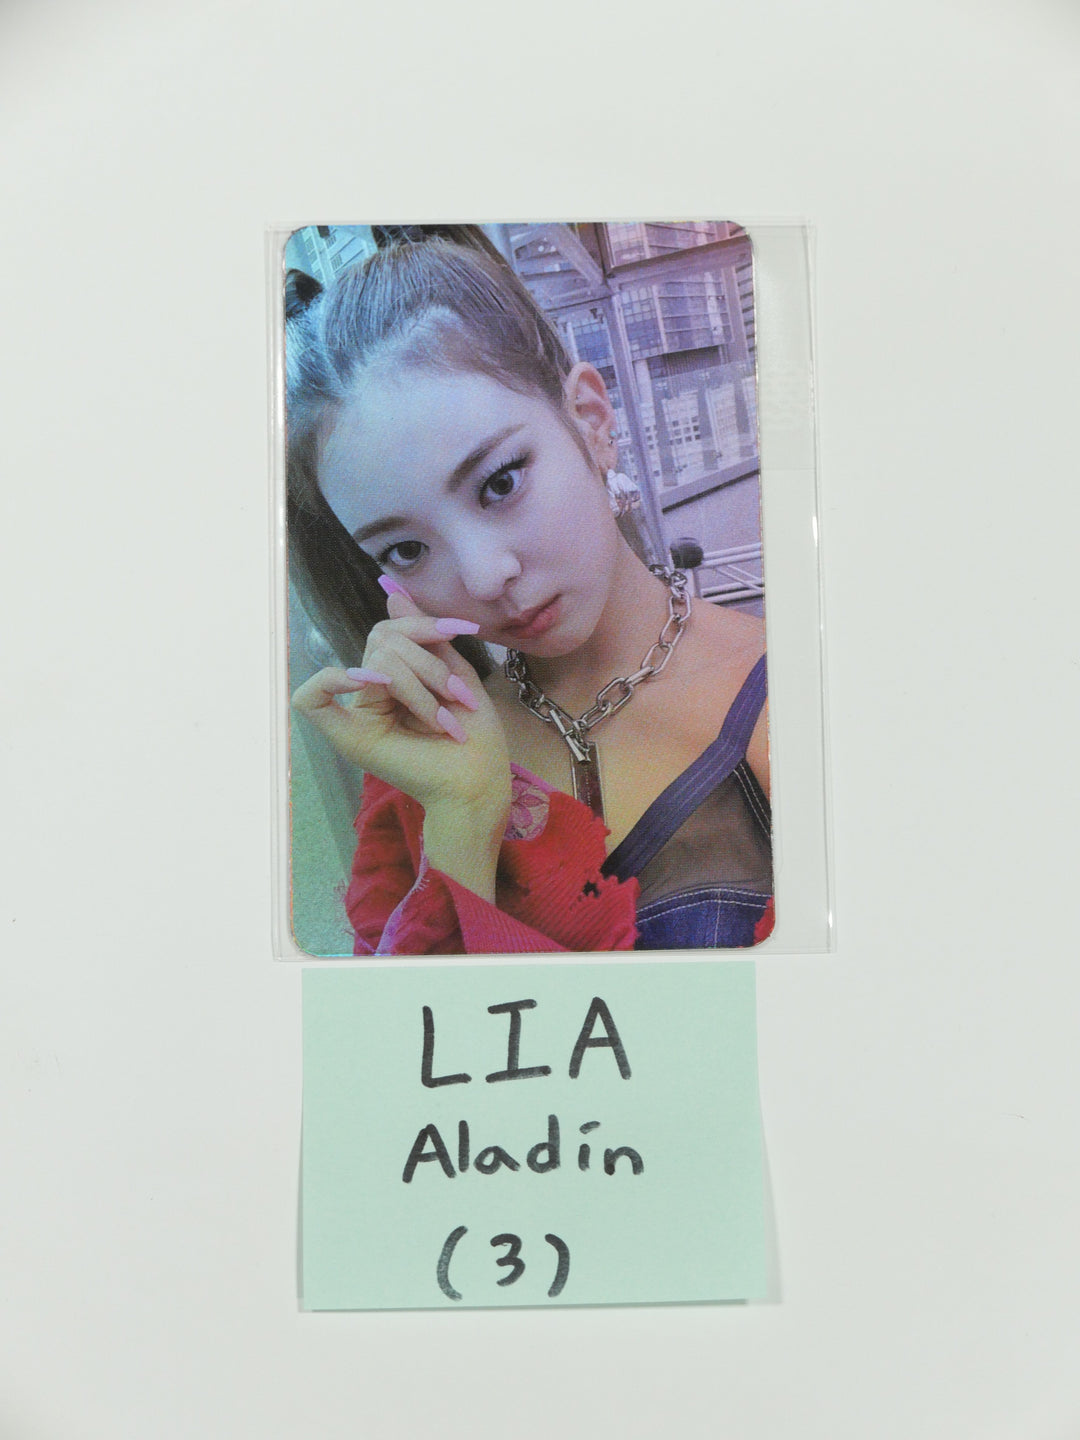 ITZY 'CRAZY IN LOVE' - Aladin Pre-Order Benefit Hologram Photocard [Updated - 9/27]